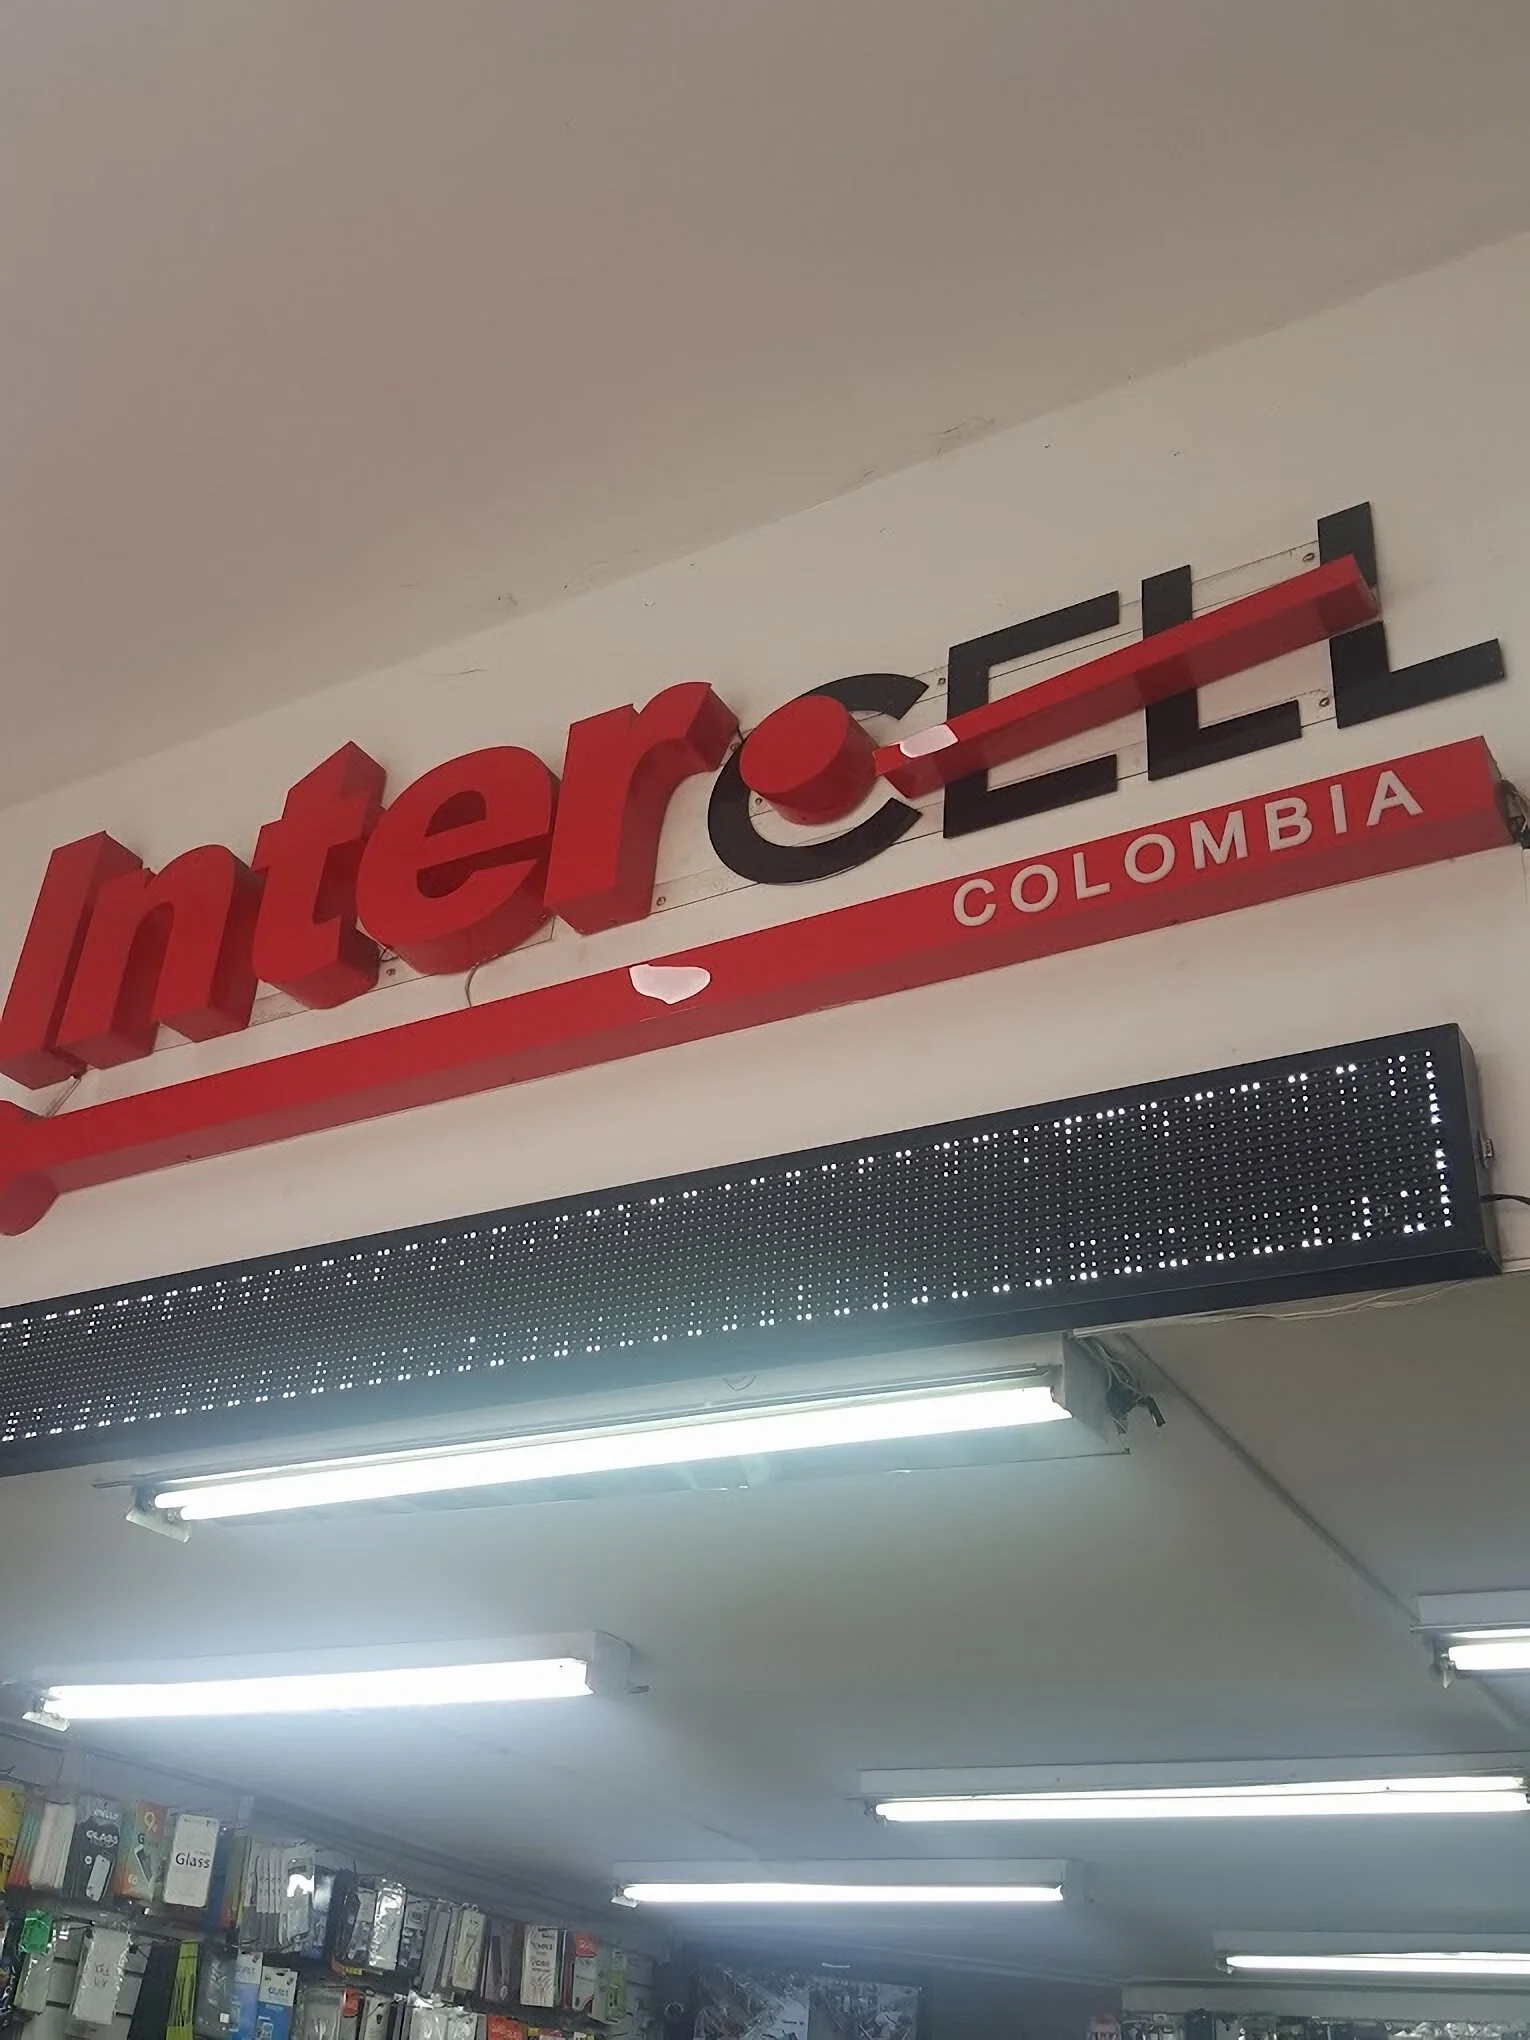 Celulares-intercell-colombia-13825